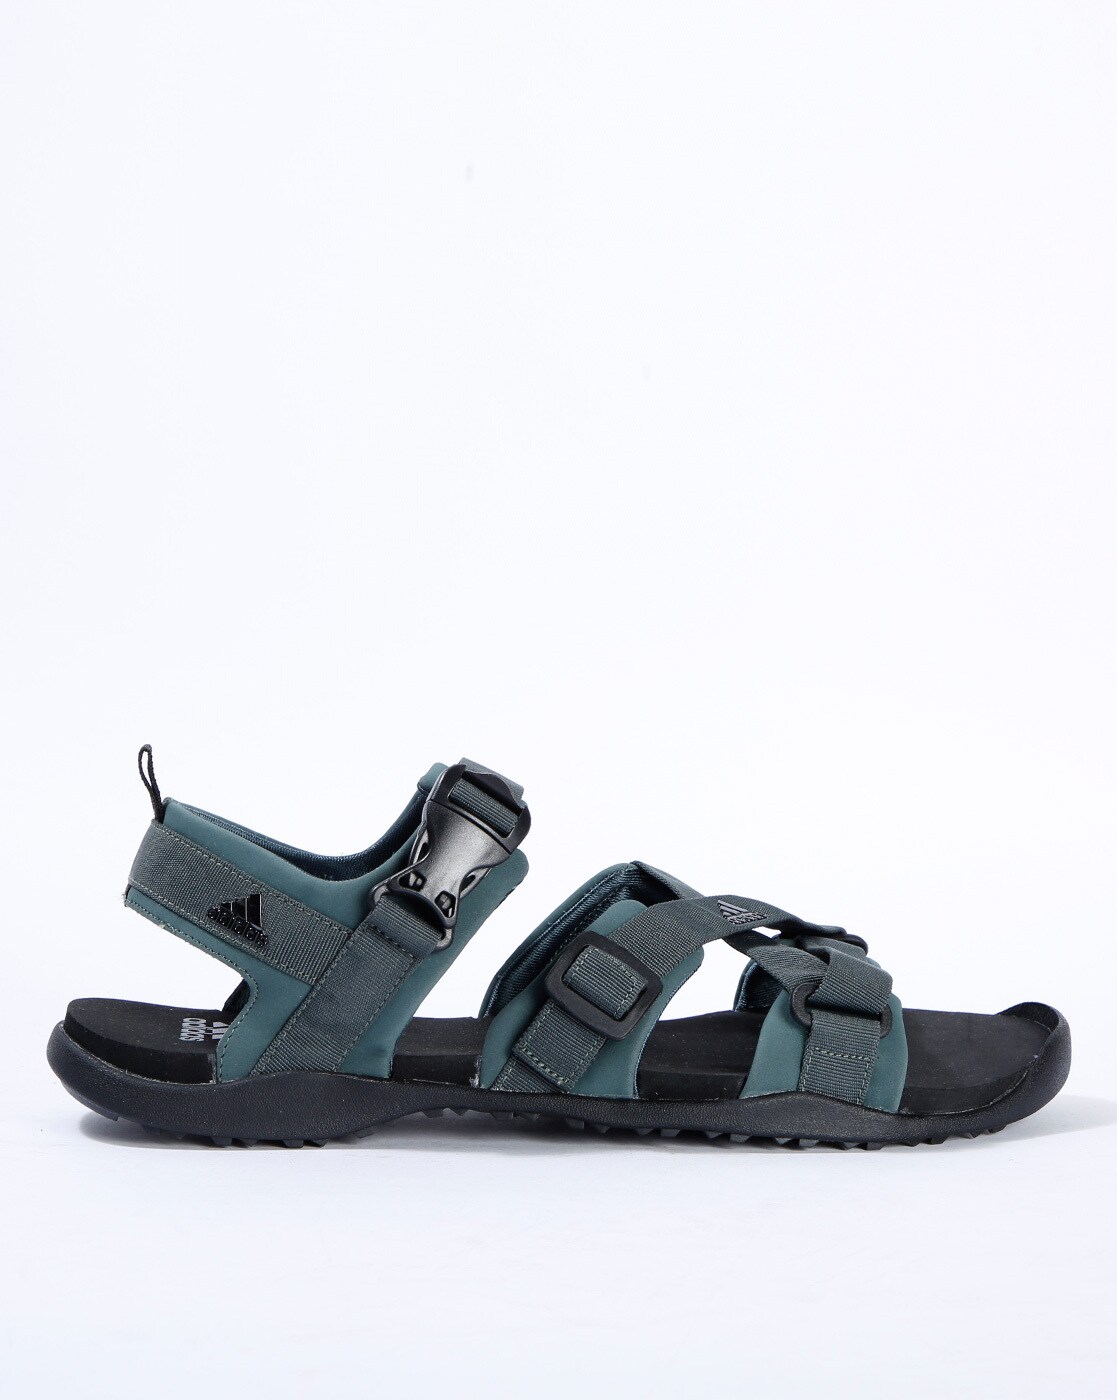 Buy Teal Blue Sandals for Men by ADIDAS 